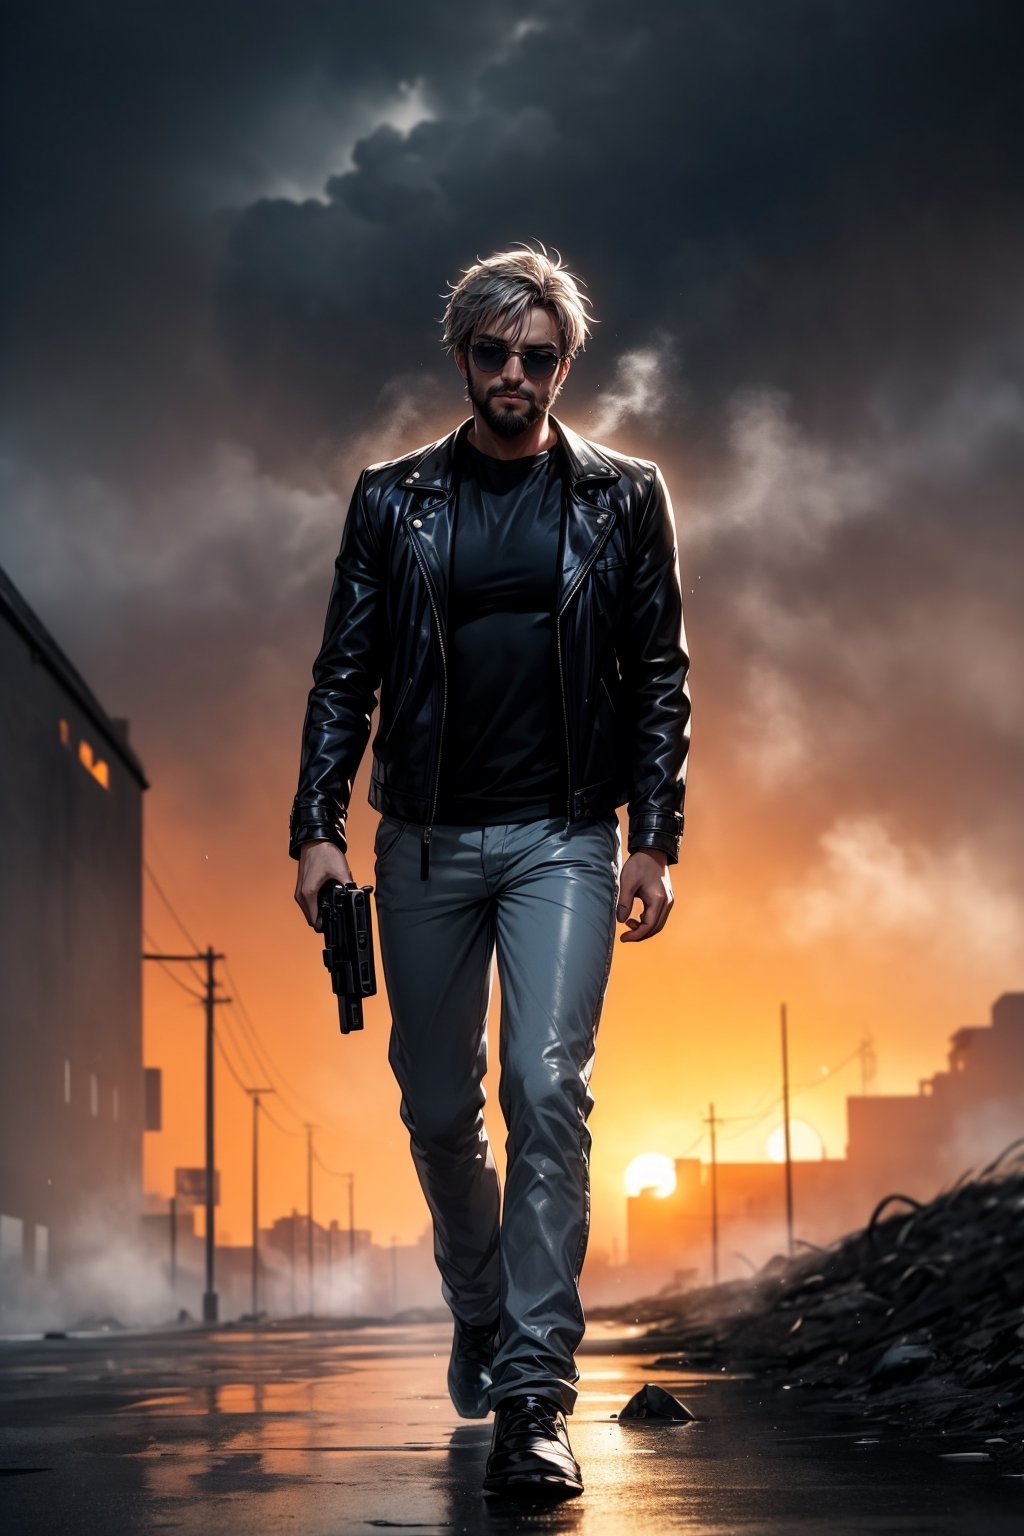 A handsome bearded man, sunglasses, grey messy hair, athletic, muscular, wearing black leather jacket, Terminator movie like, standing at the on fire rooftop building while rain, carrying gun, wet hair and clothes, full body, epic sunset background, misty, foggy, shallow depth of field, bokeh, cinematic, masterpiece, best quality, high resolution,mecha